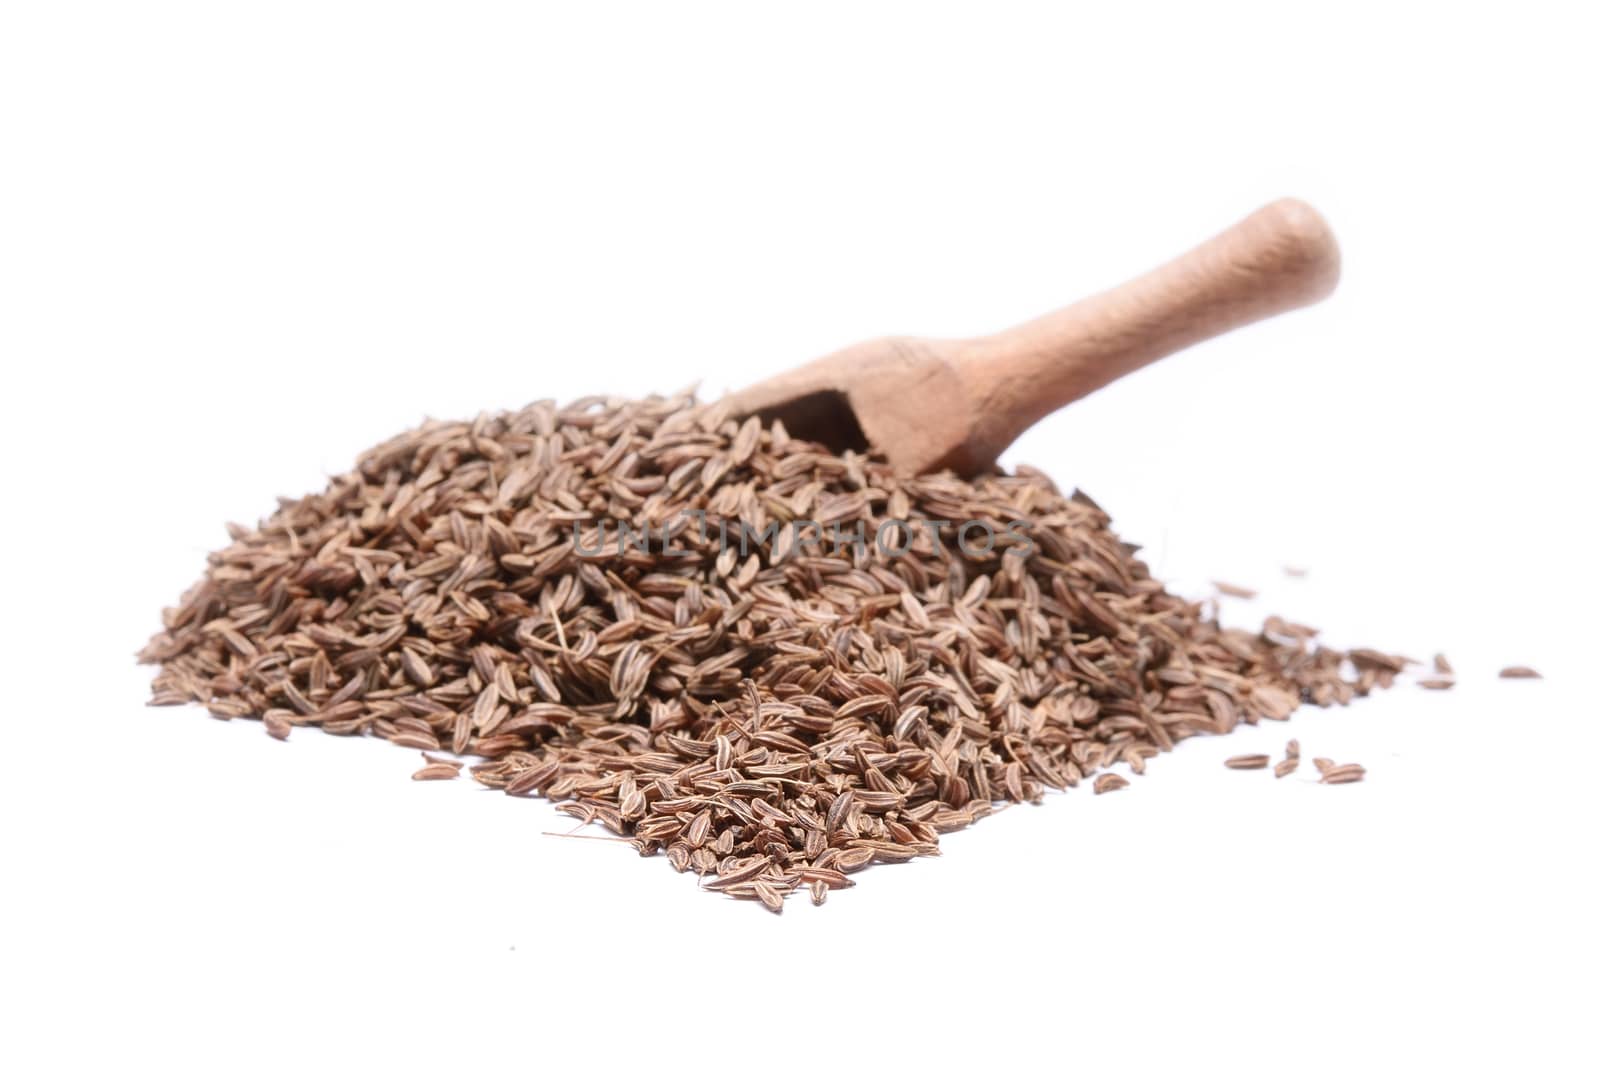 Caraway seed in an olive wood scoop and scattered isolated on white background.